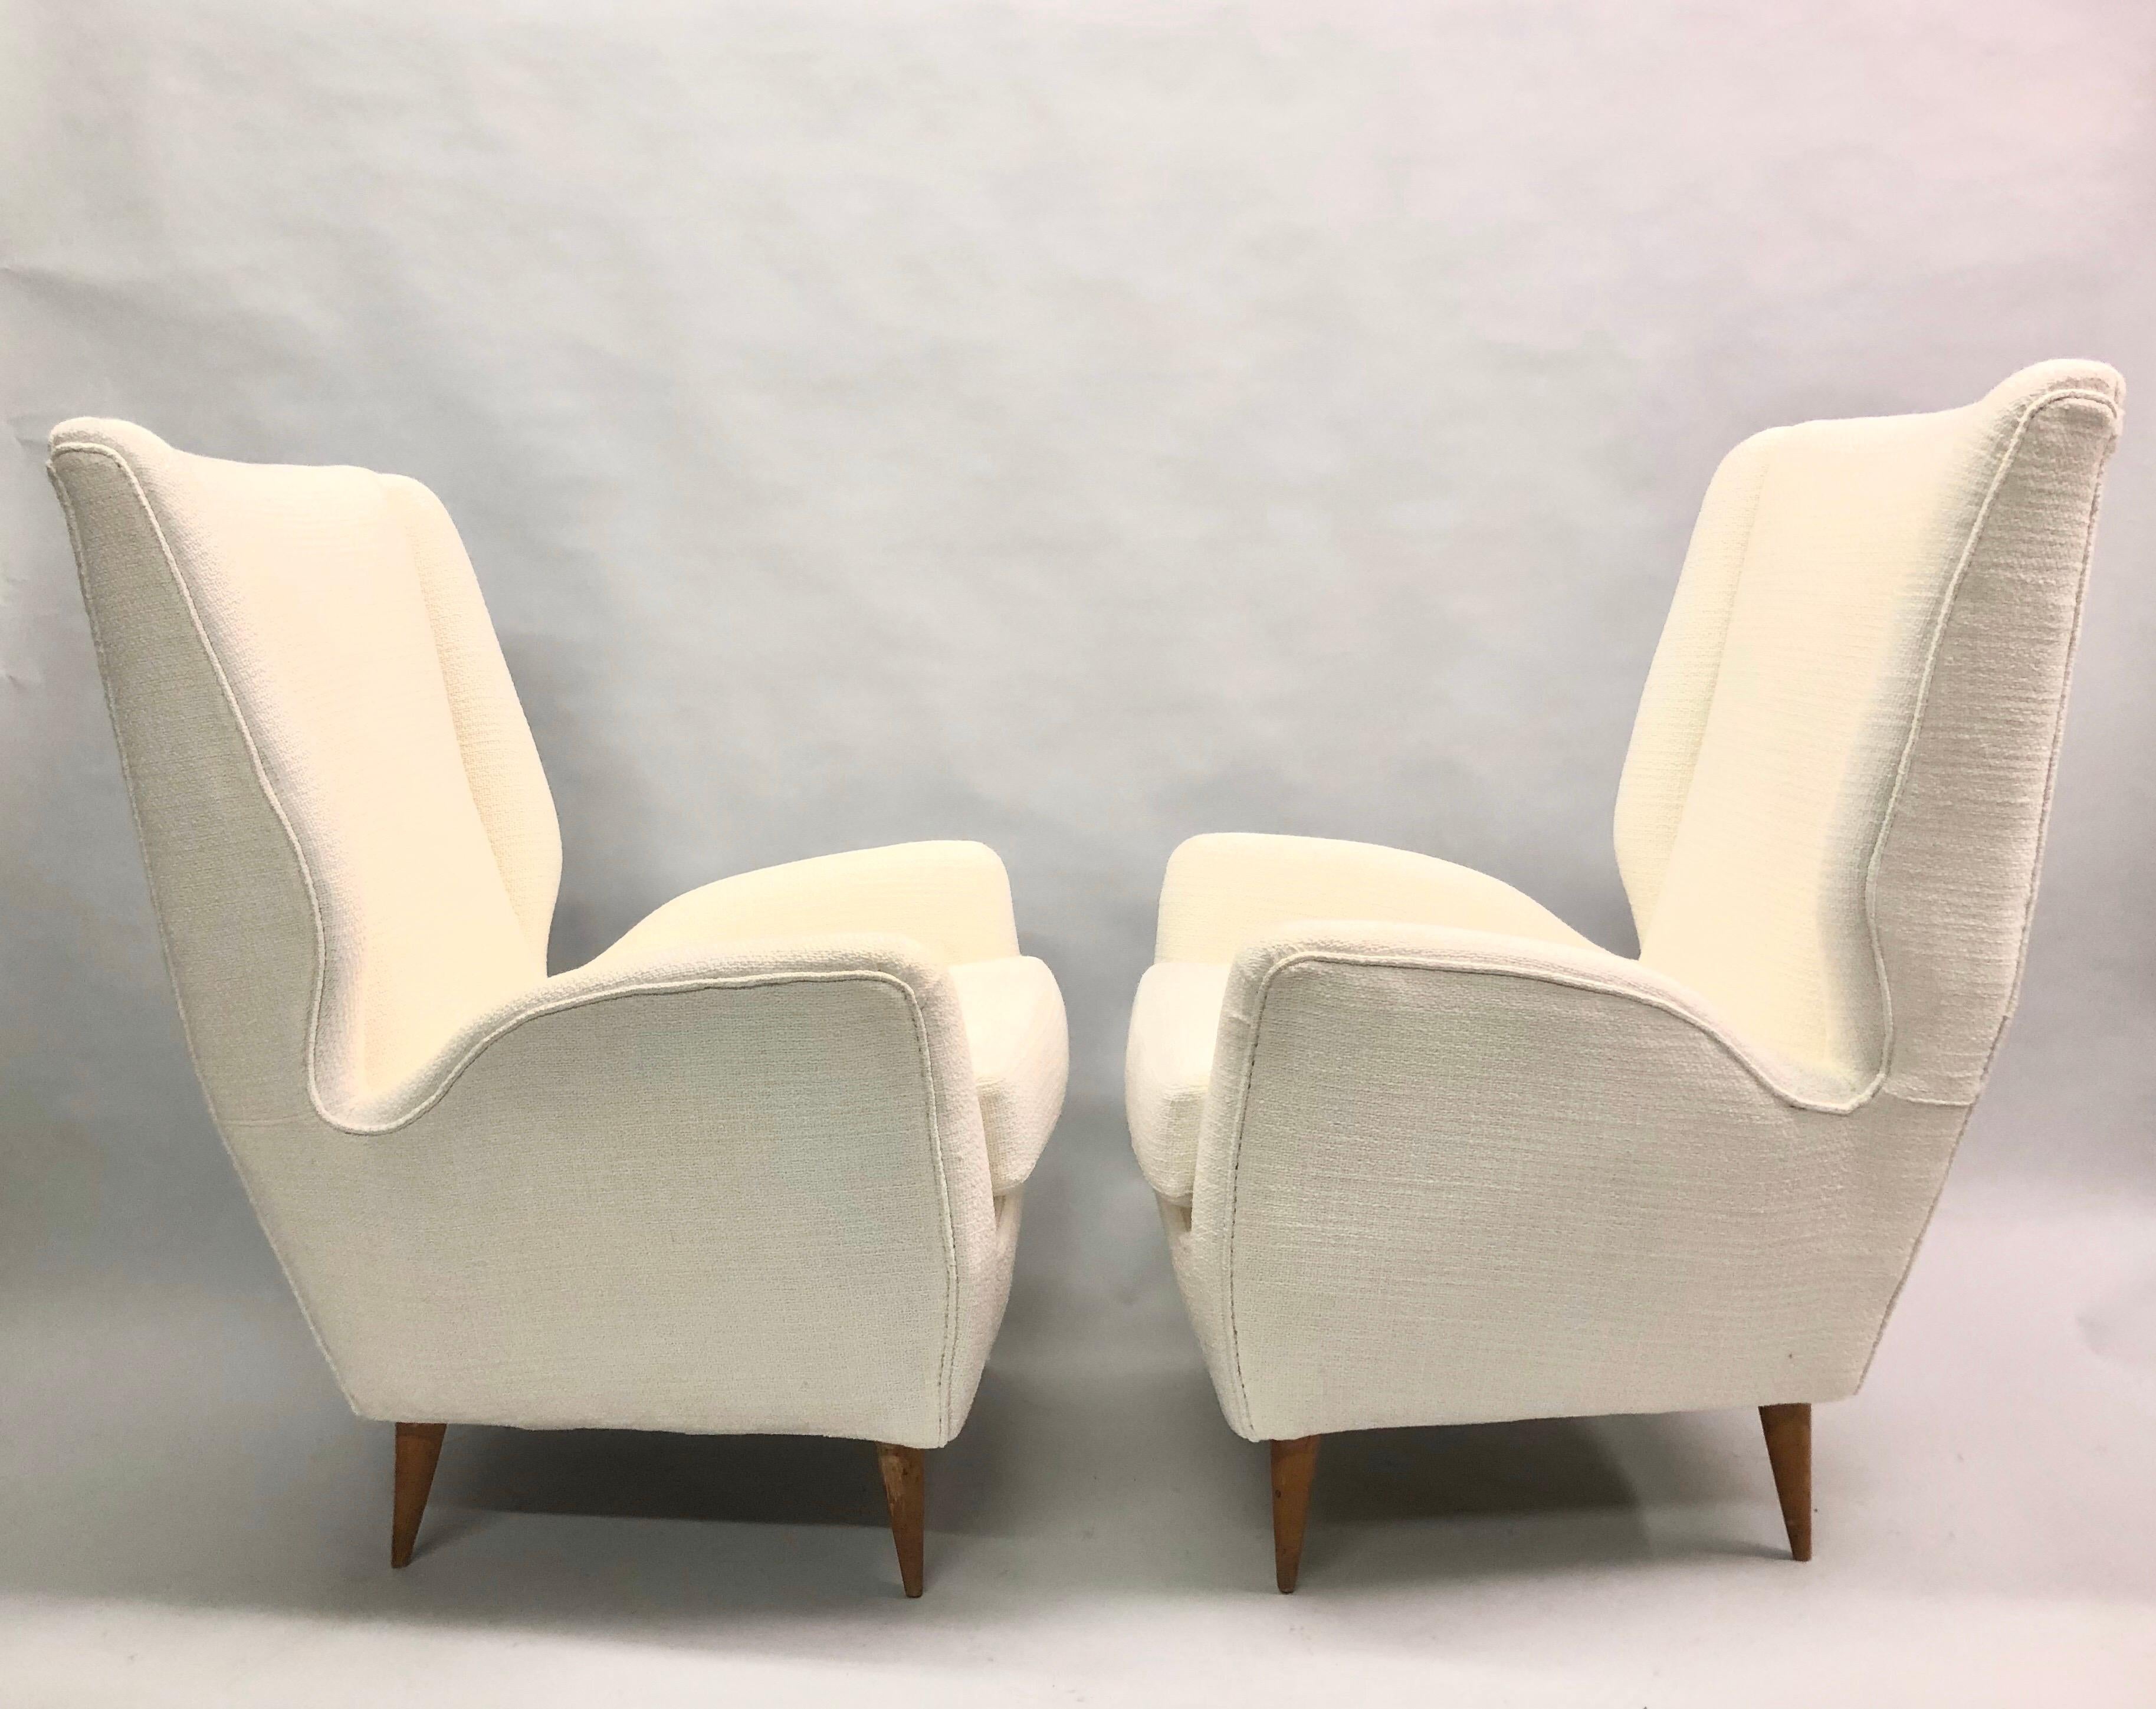 Cotton Pair of Italian Wingback Lounge Chairs / Armchairs by Gio Ponti, Model 512